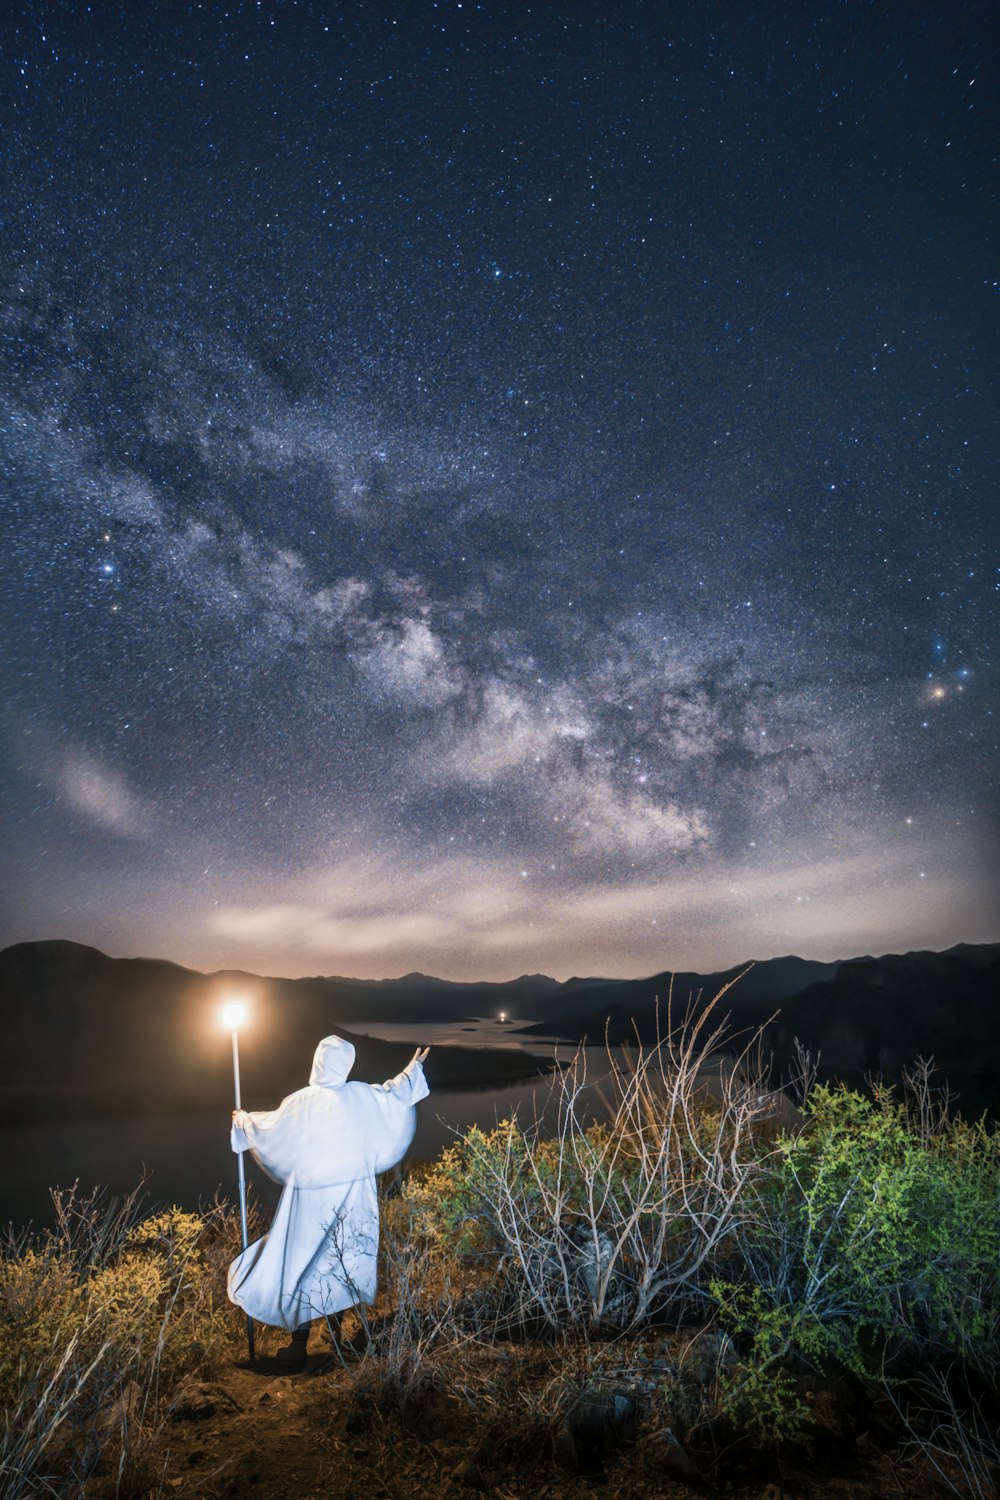 a statue of a person holding a light saber under a night sky filled with stars